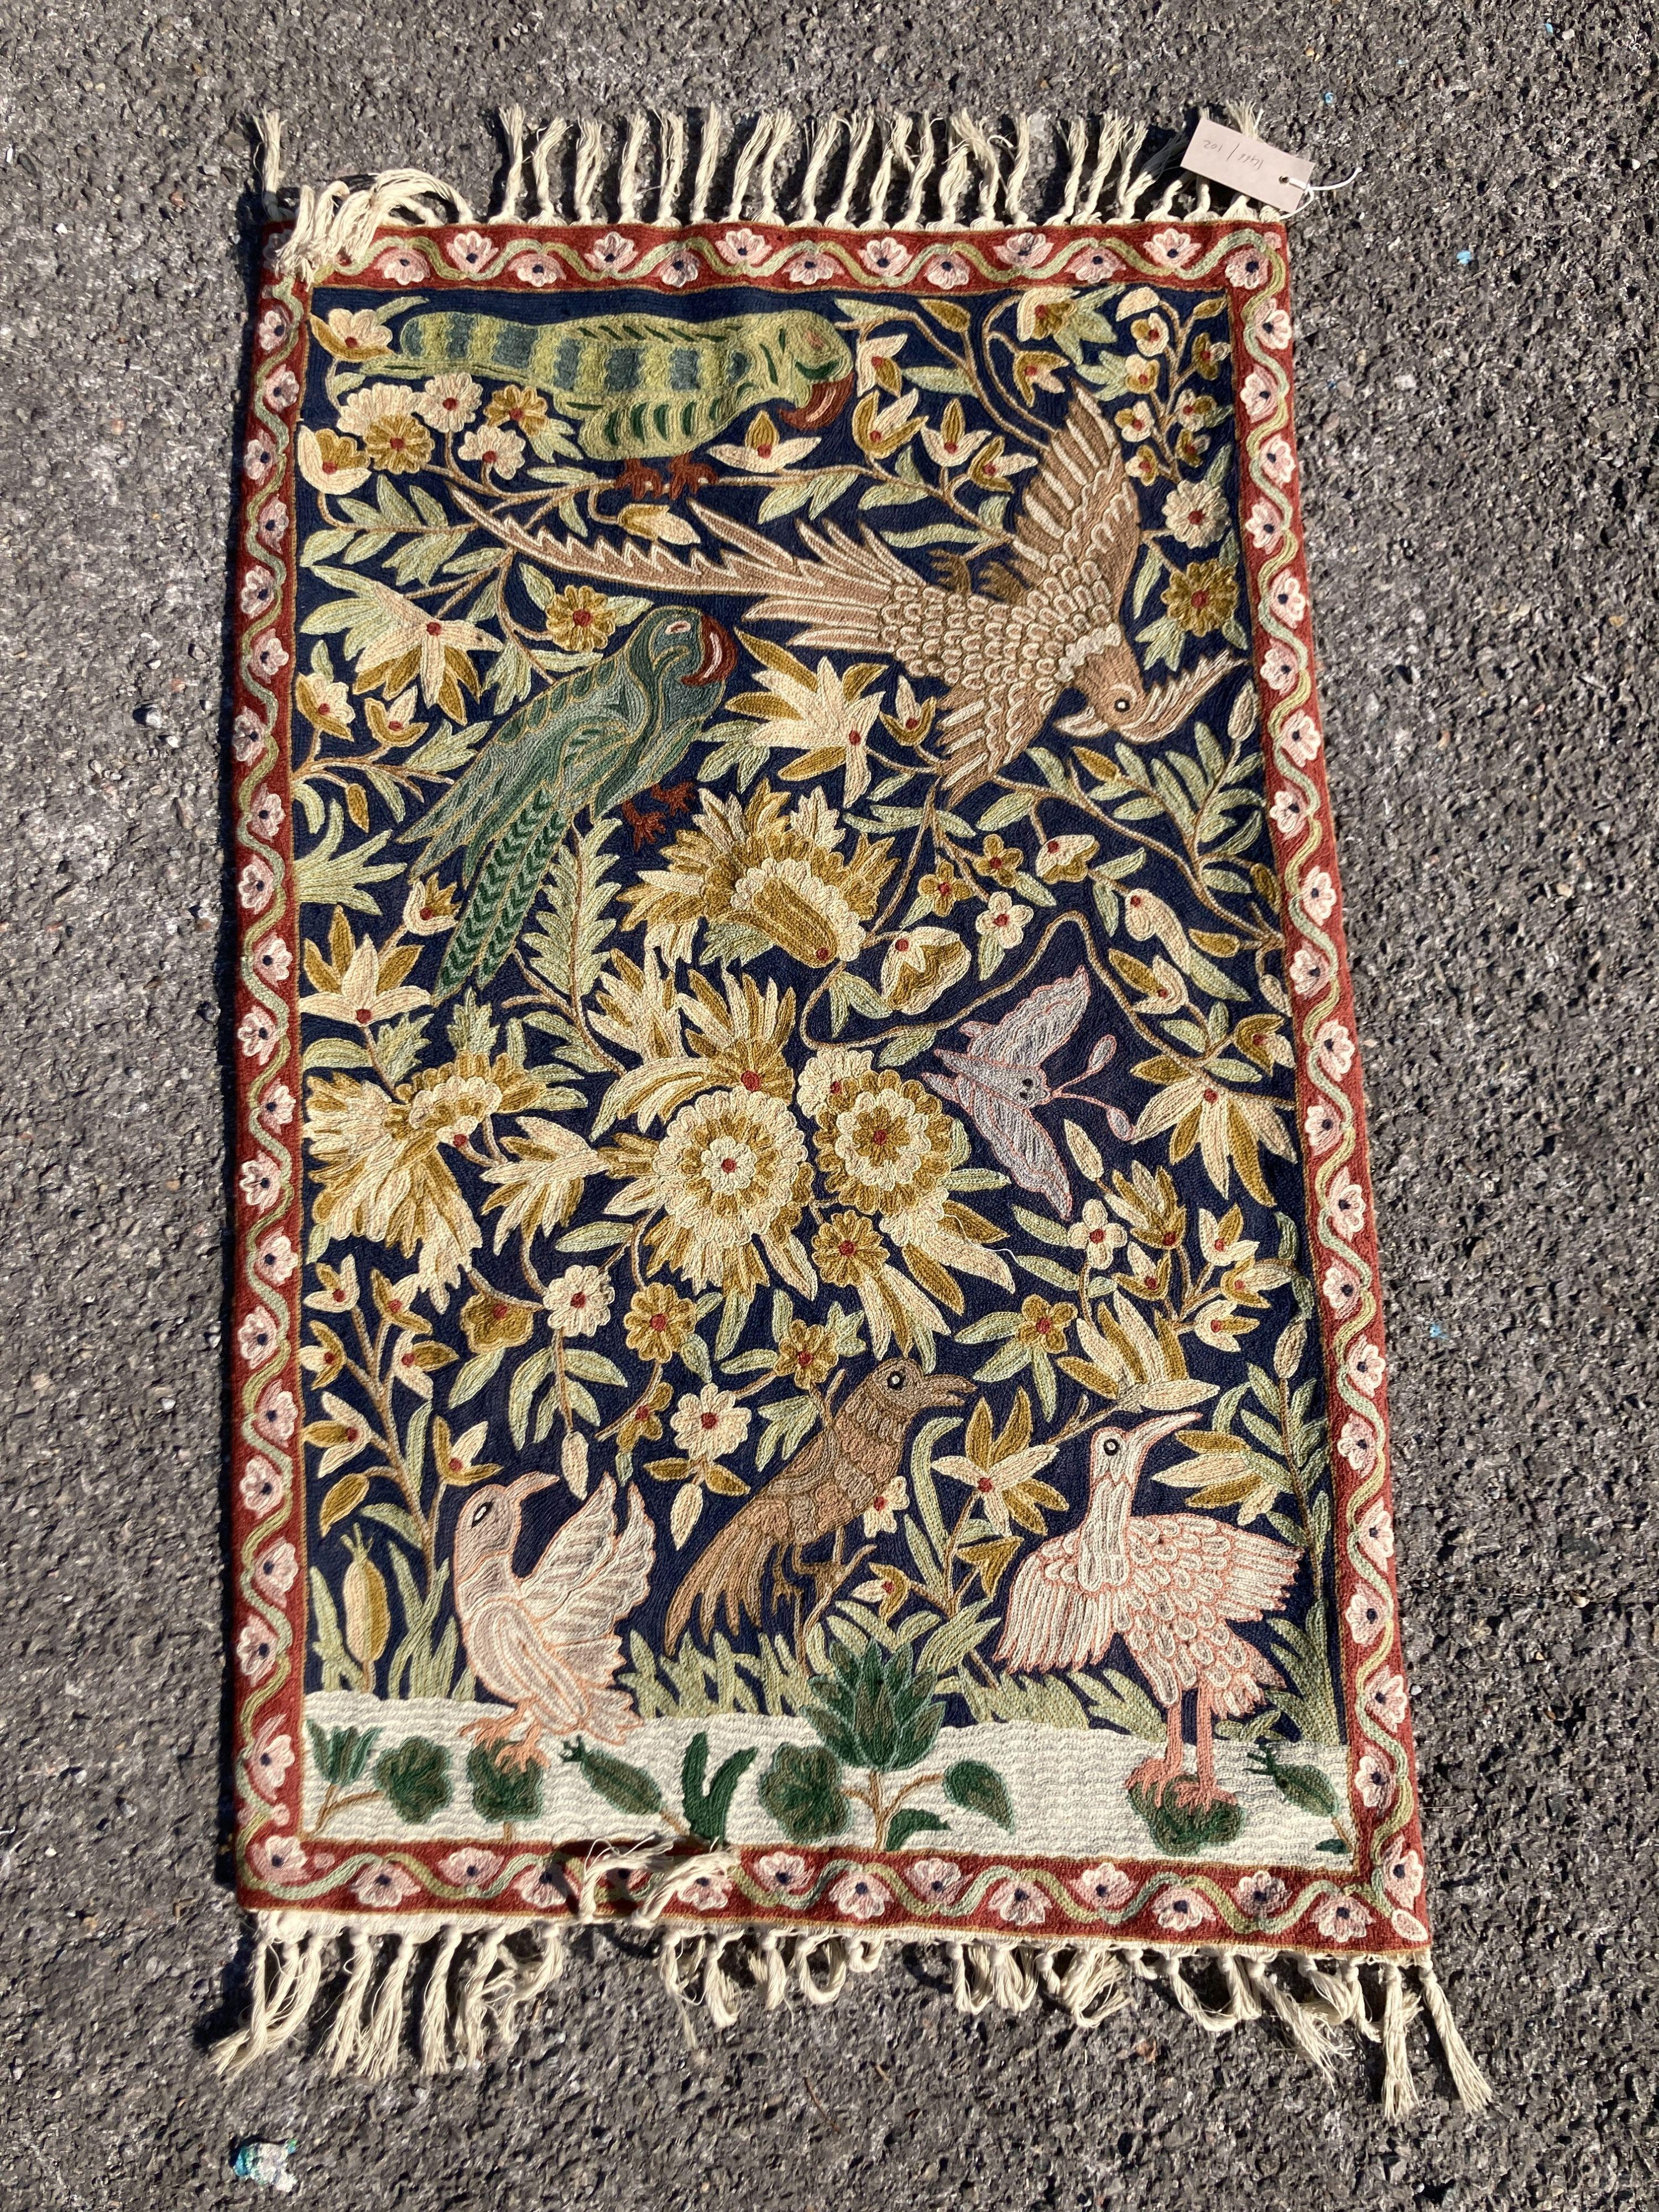 An Indian embroidered wall hanging panel, decorated with birds and foliage, 90 x 60 cms.